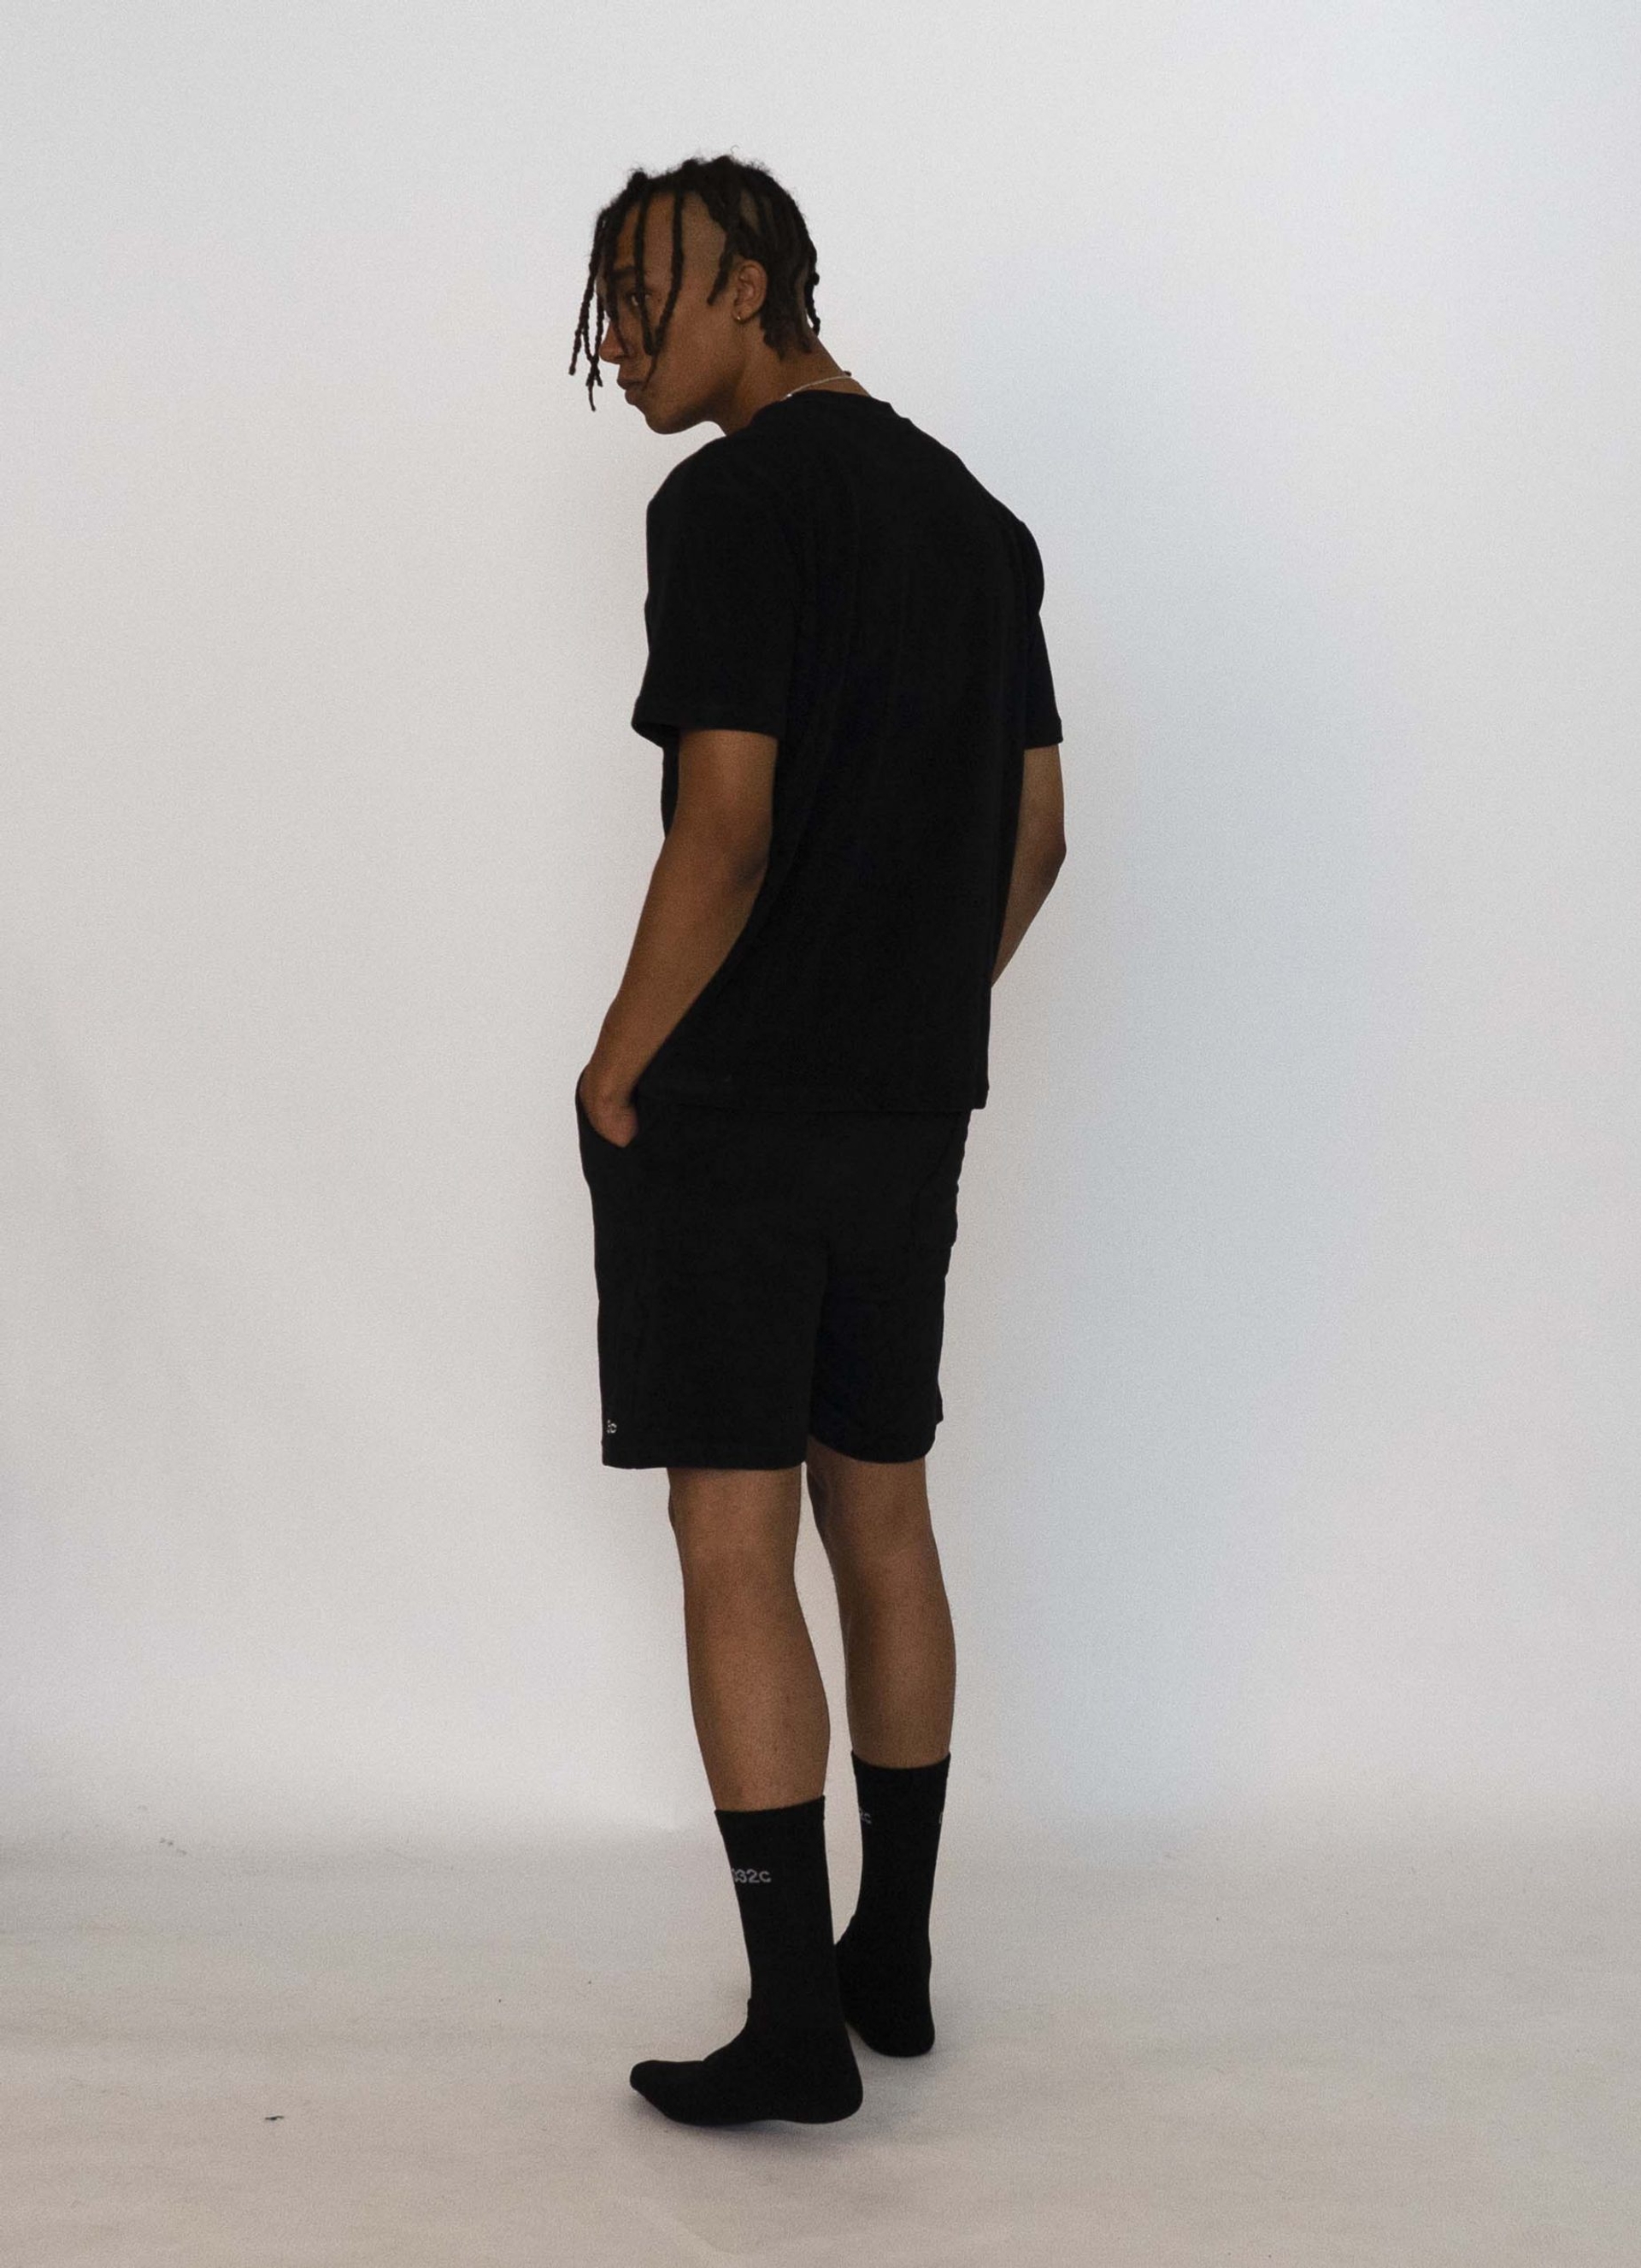 Buyegi goes for the full ensemble in the 032c LoveSexDreams Terry t-shirt in black, and the Terry shorts in black, to match